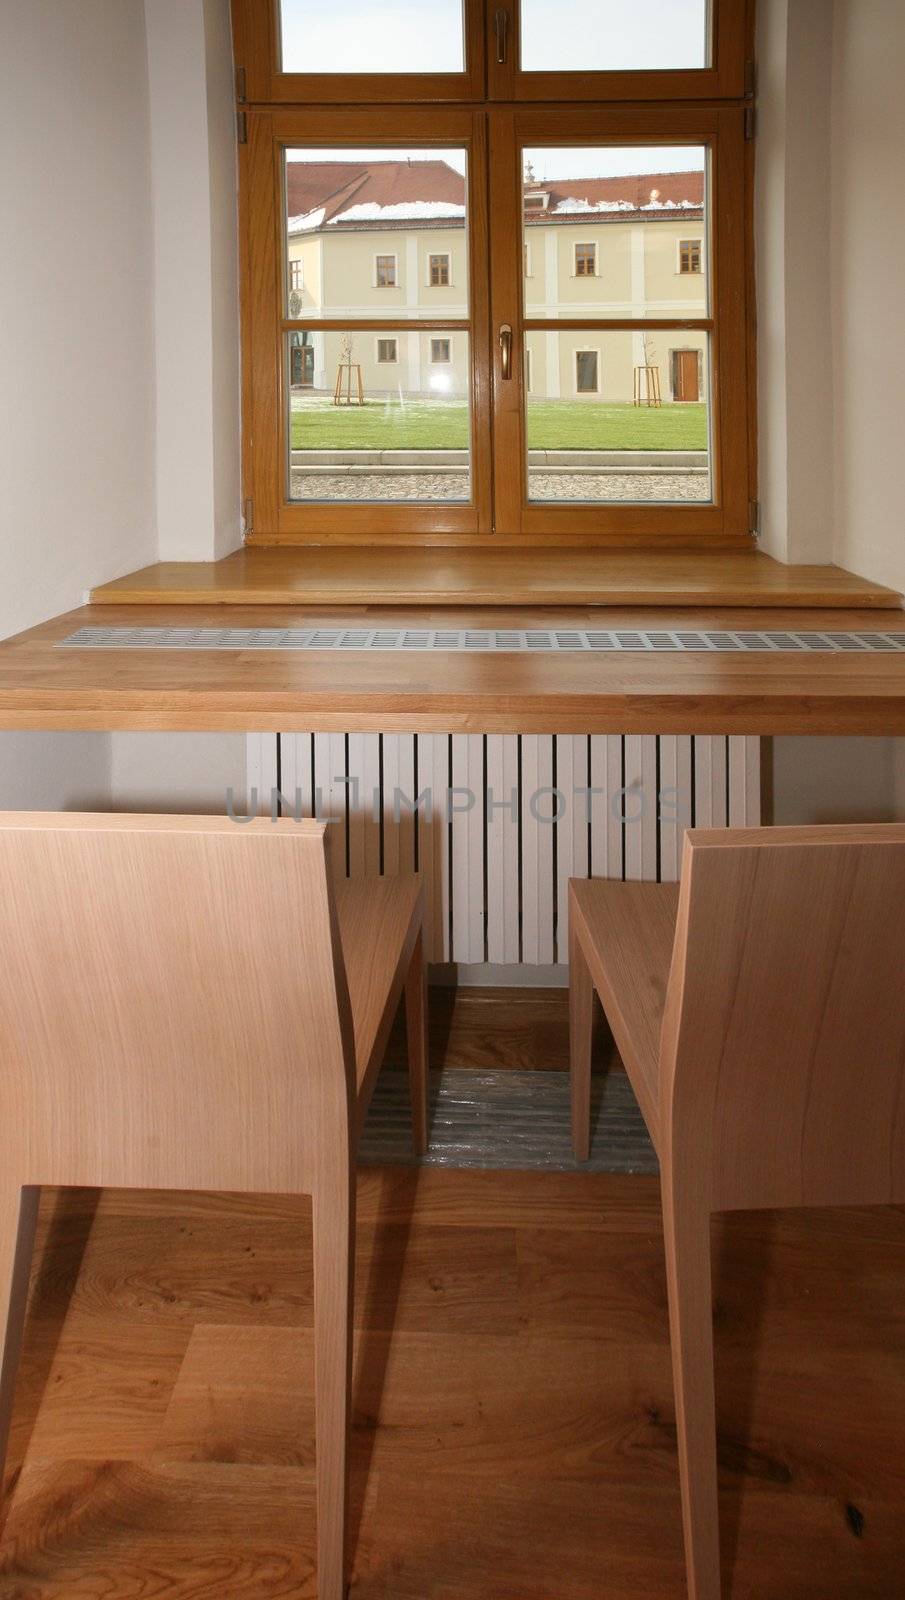 Wooden window with wooden table and chairs